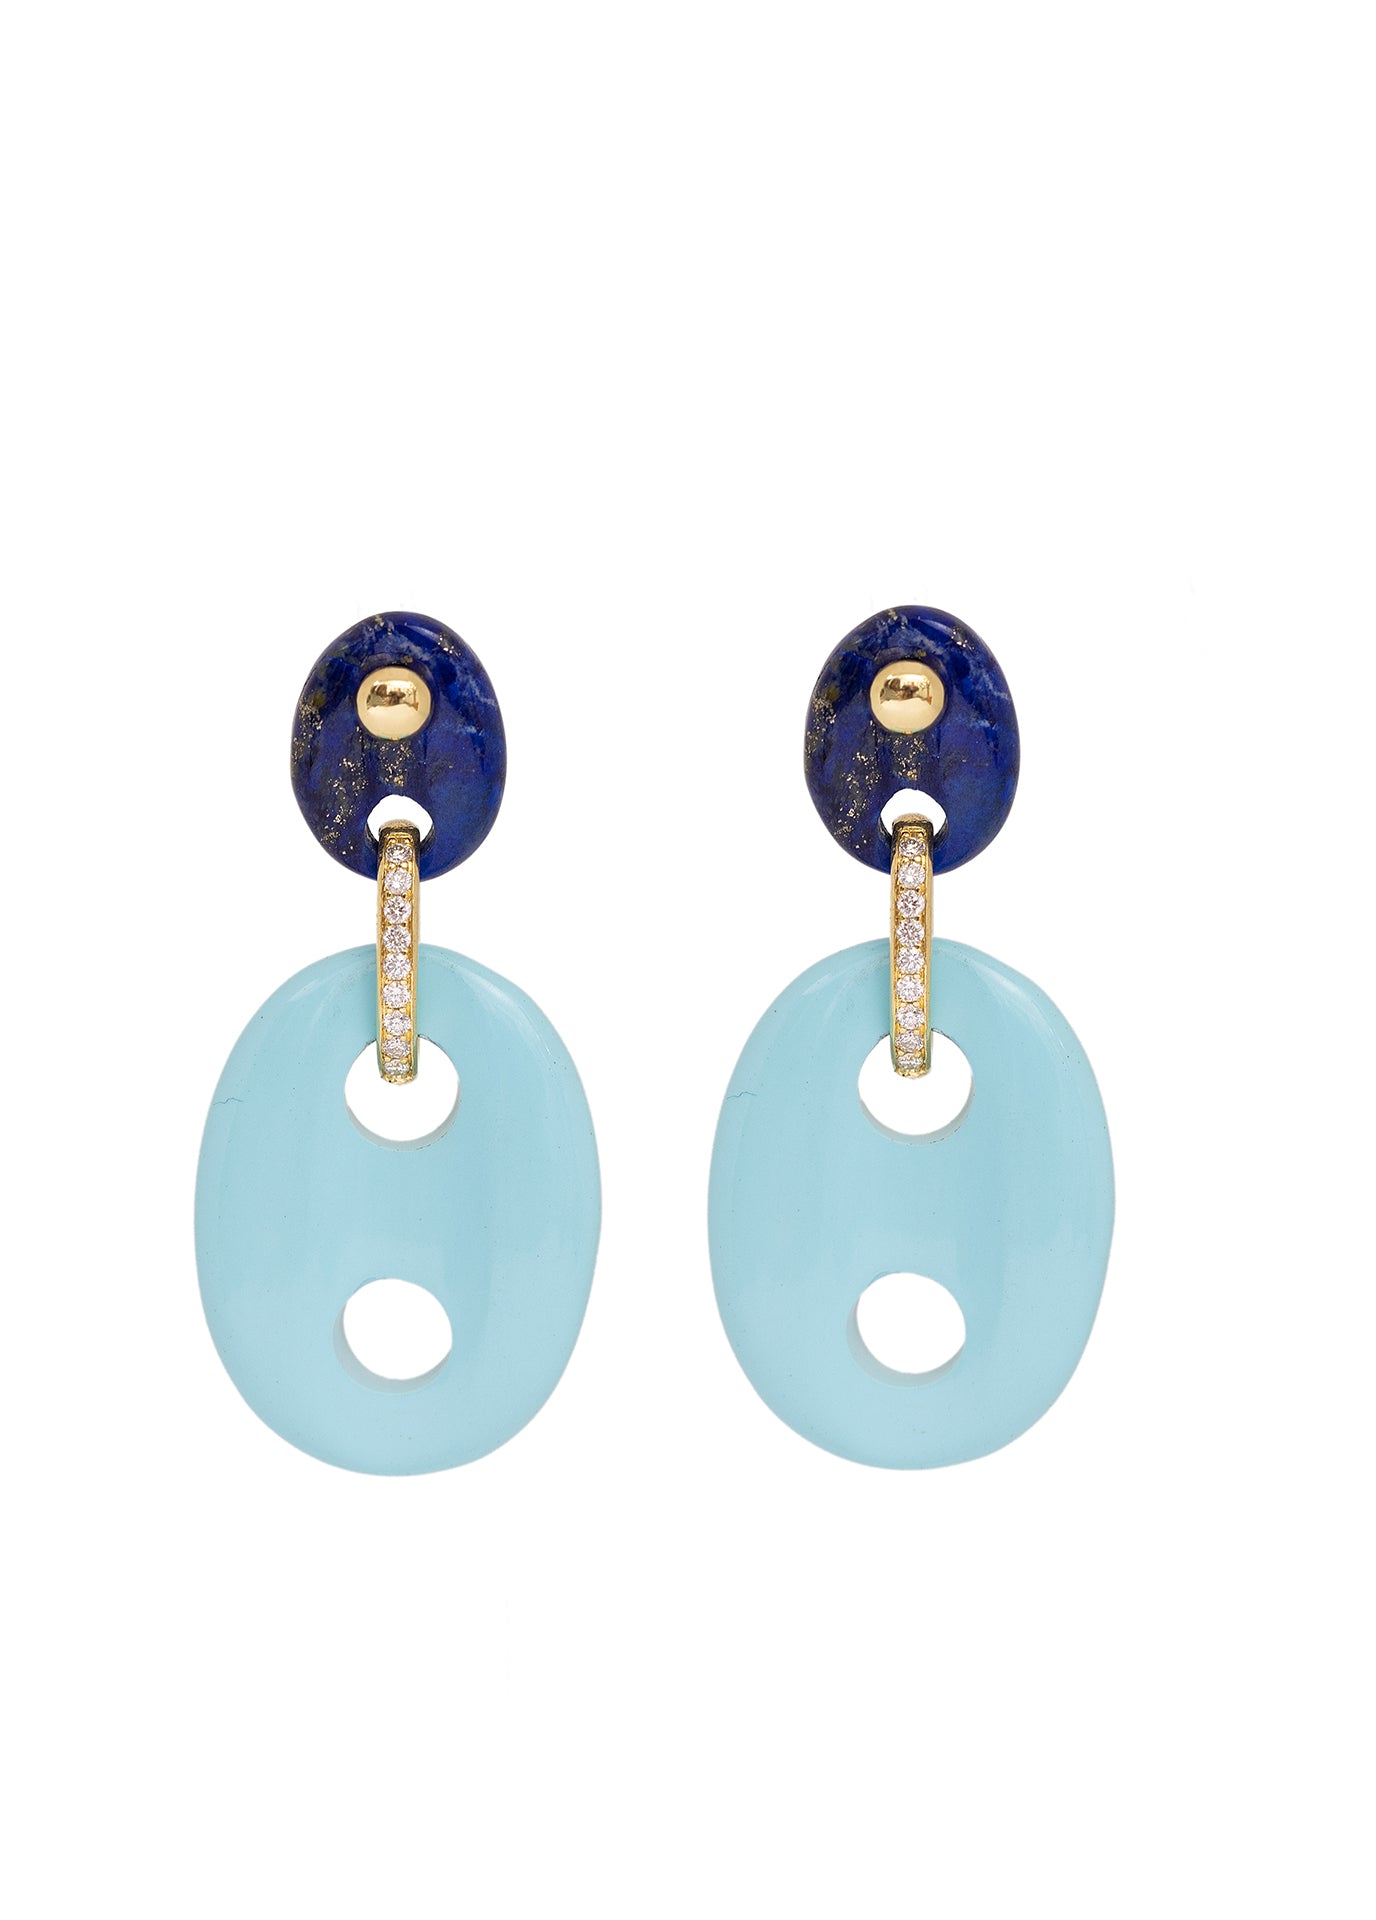 Mariner Link Earrings in Turquoise and Lapis